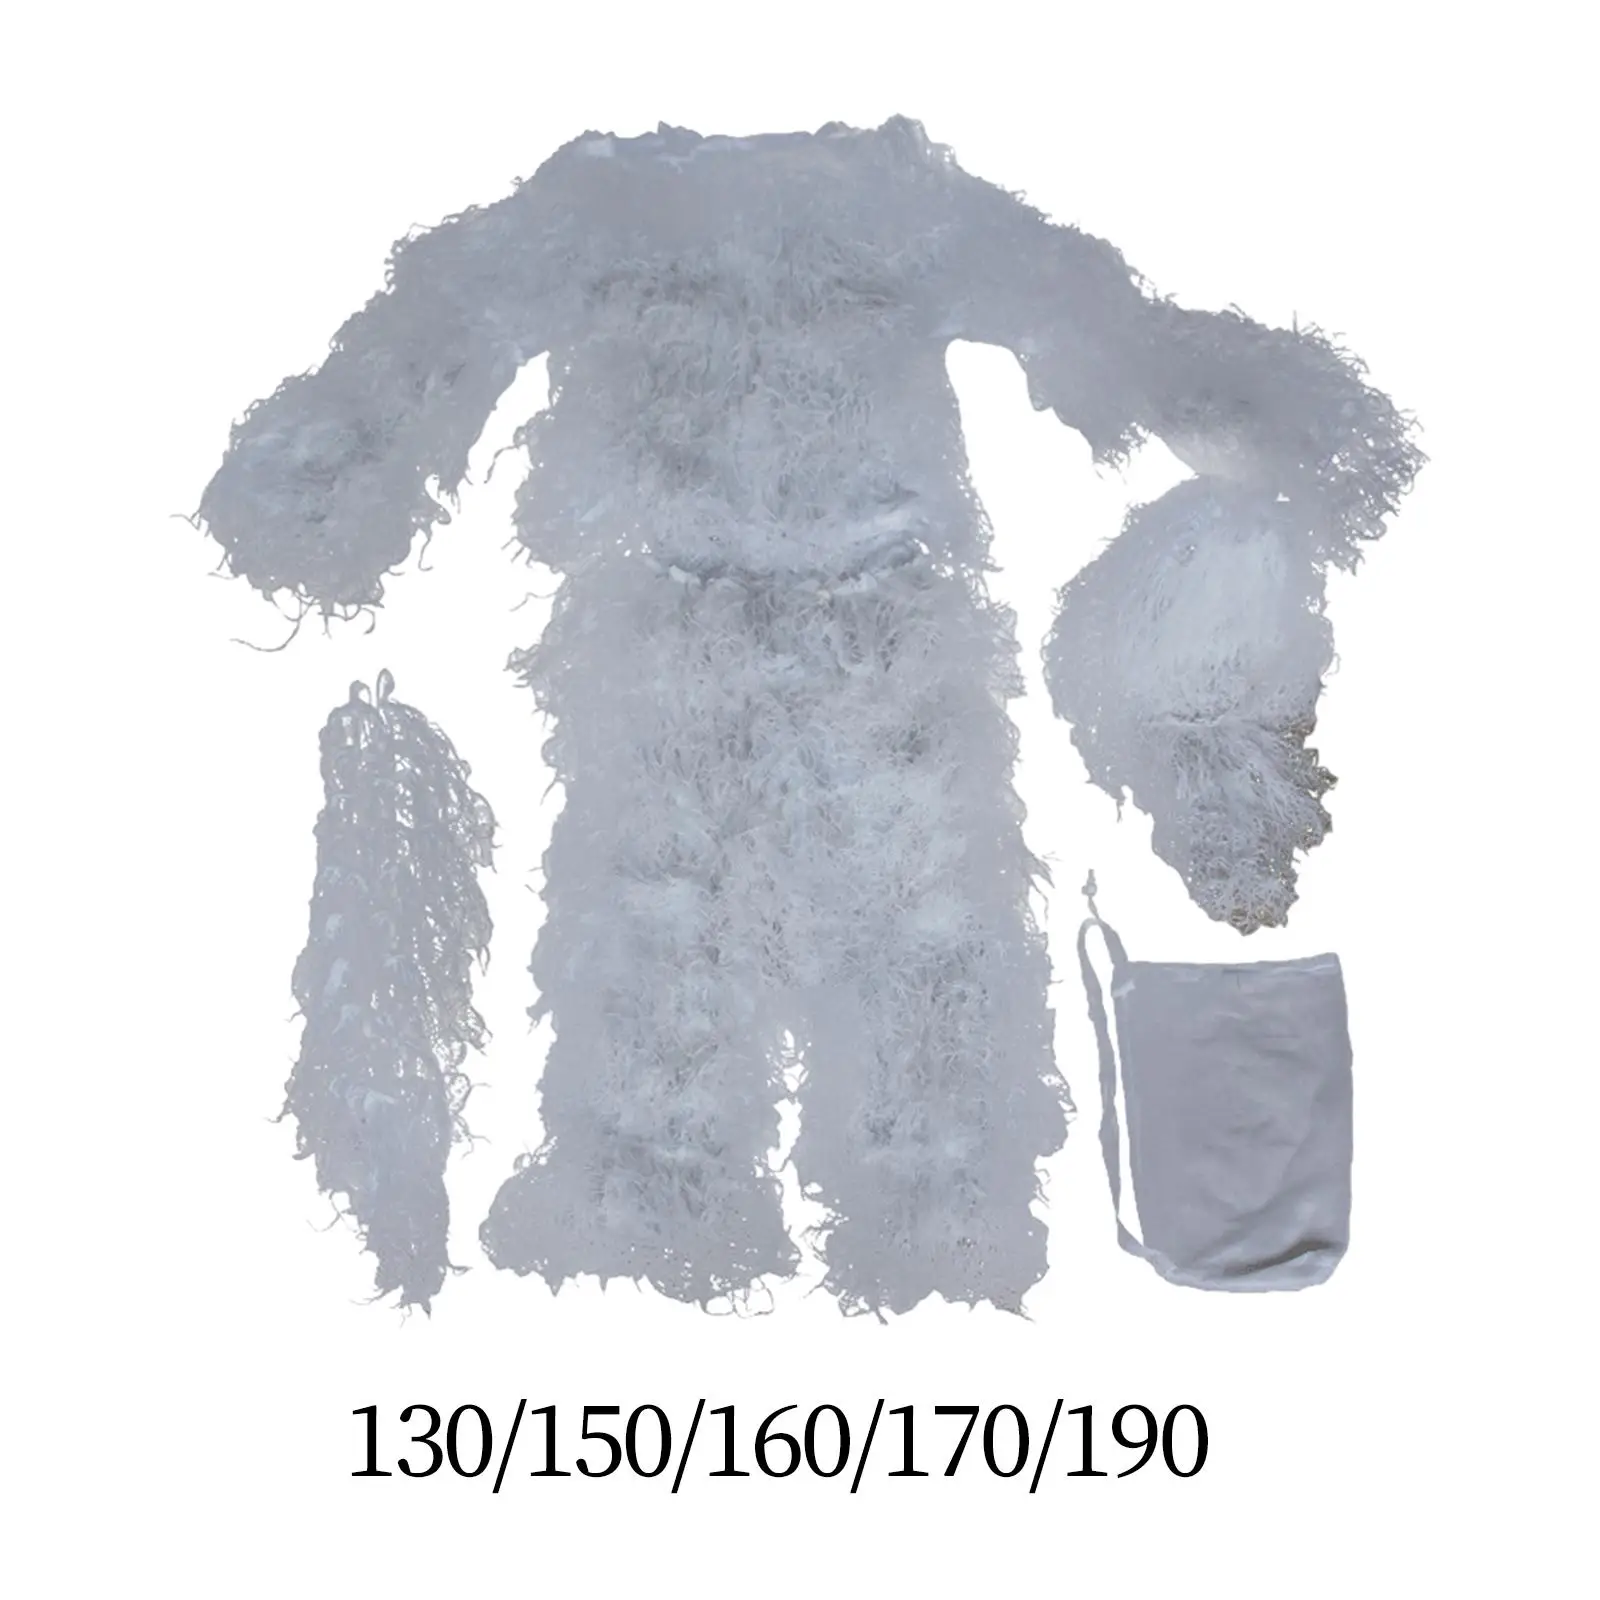 Ghillie Suit Hunting Suit Jacket and Pants Apparel Clothes for Bird Watching Costume Photography Hunting in Winter